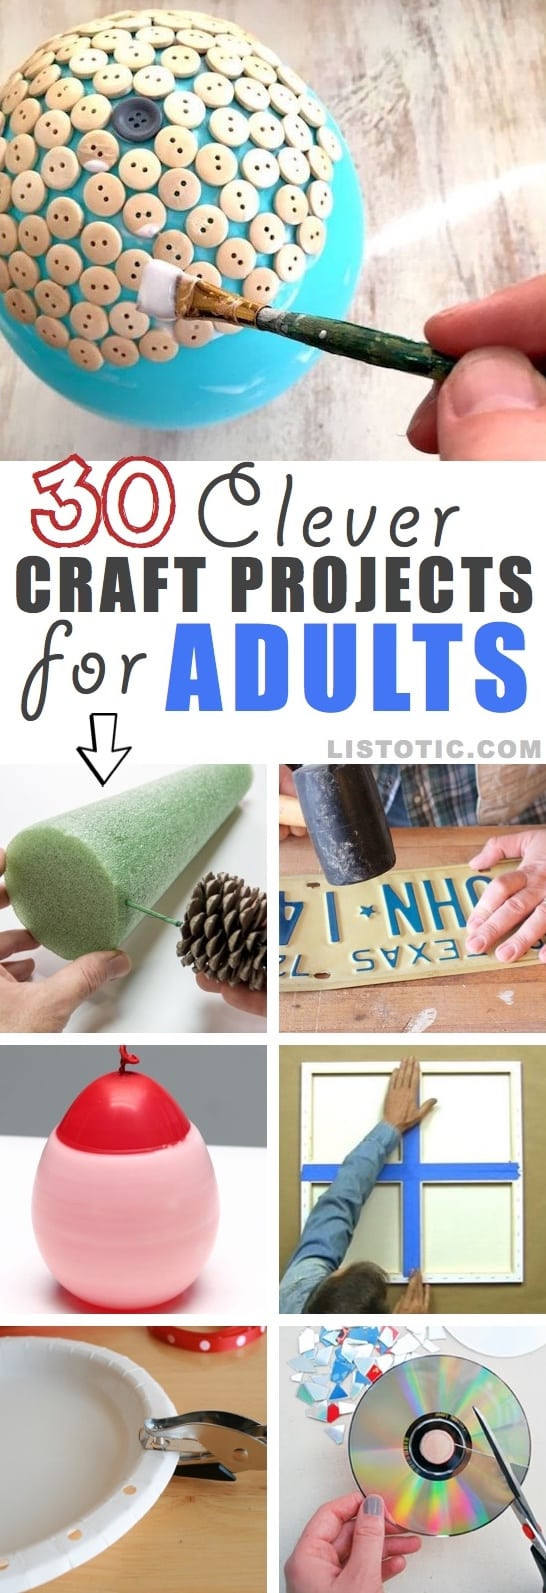 Make And Take Crafts For Adults
 Easy DIY Craft Ideas That Will Spark Your Creativity for